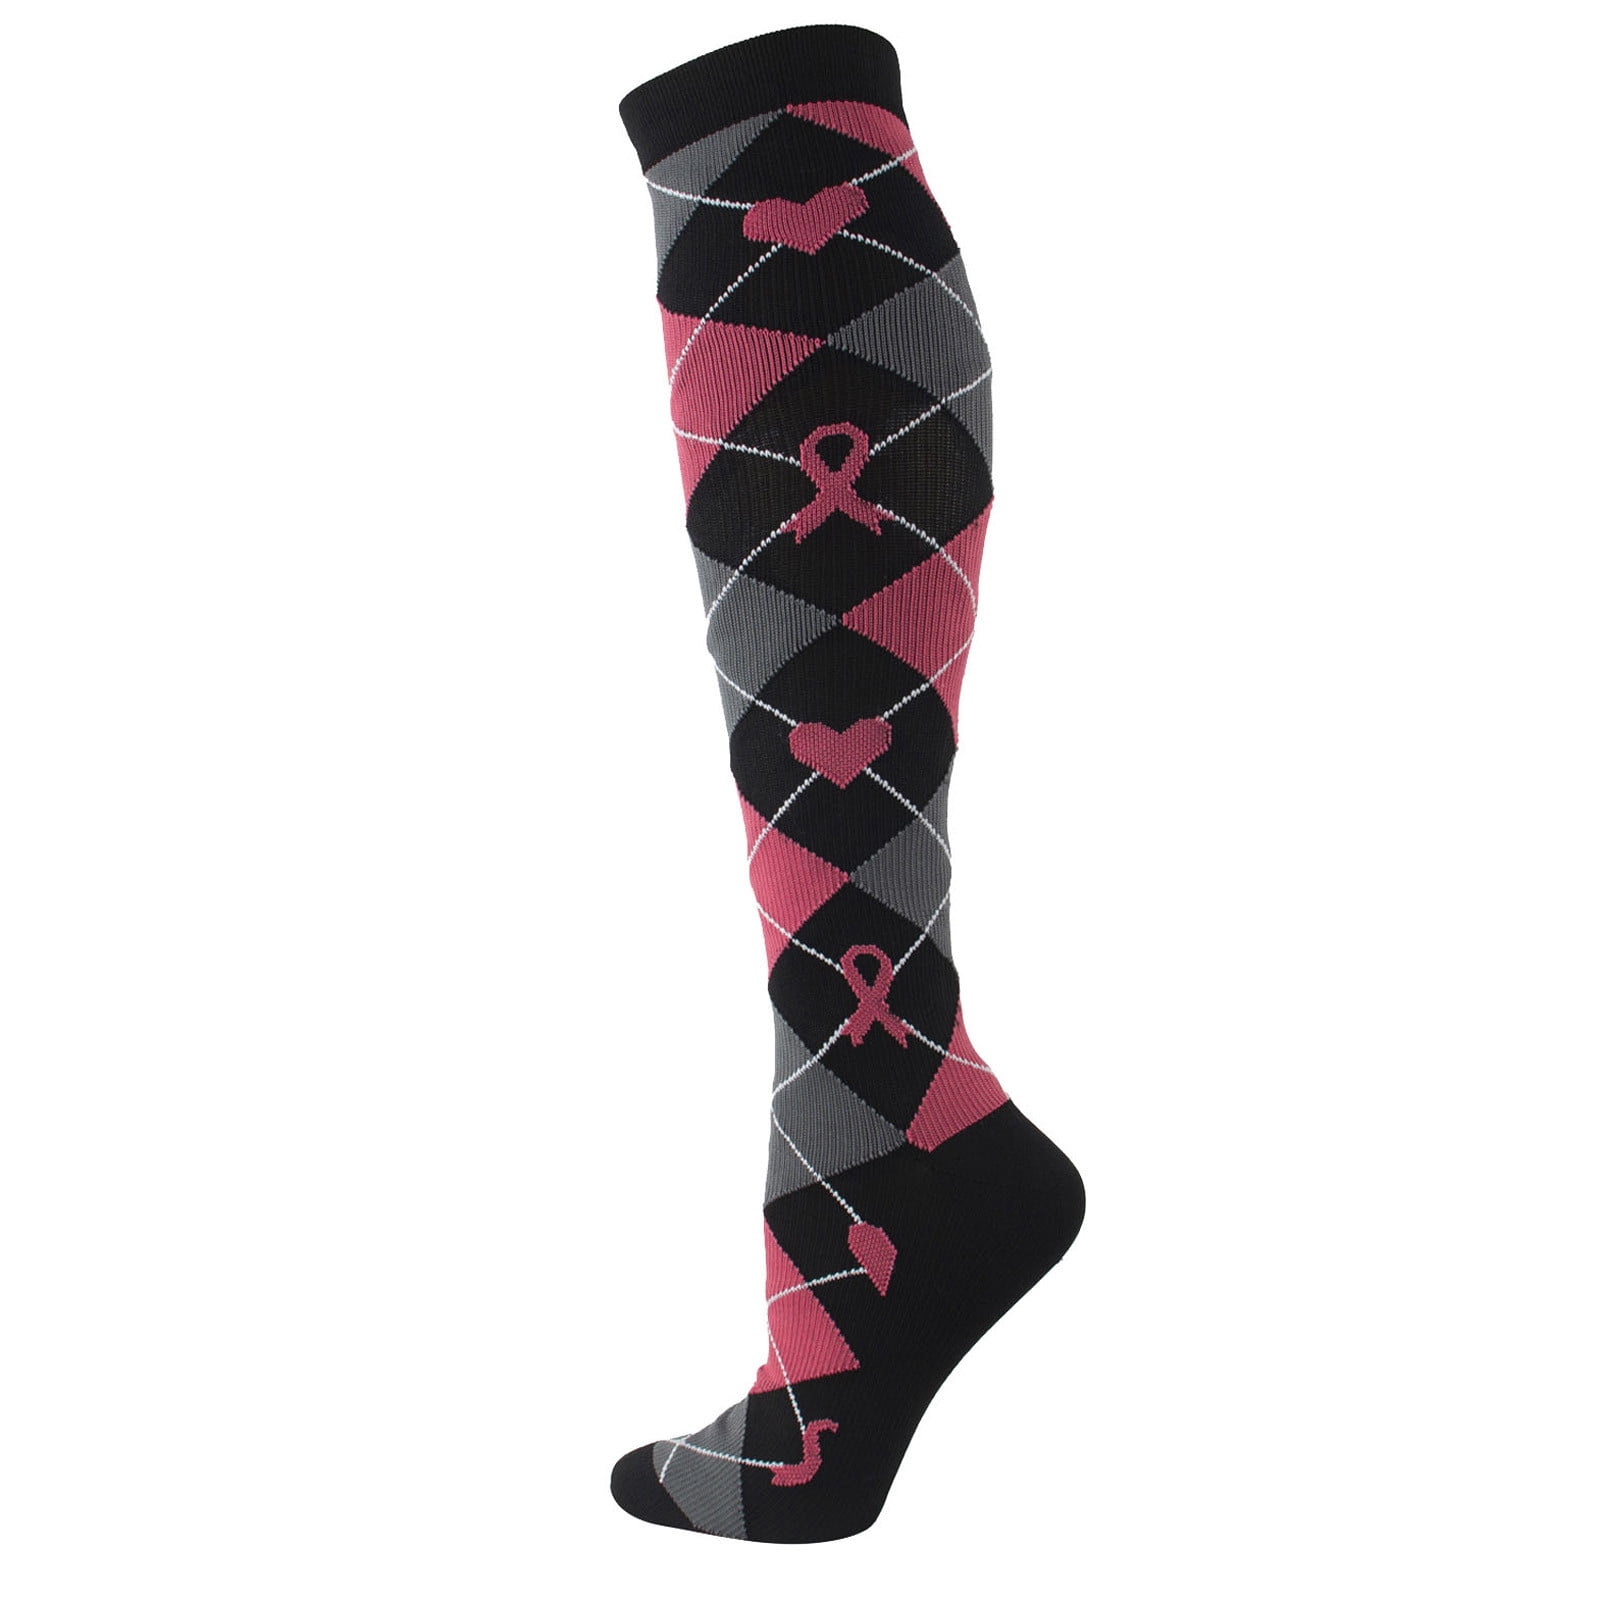 LWZWM Breast Cancer Awareness Socks Women's Novelty Pink Ribbon Socks  Breast Cancer Socks for Women Sleeveless Round Neck Cancer Care Gifts for  Women L 